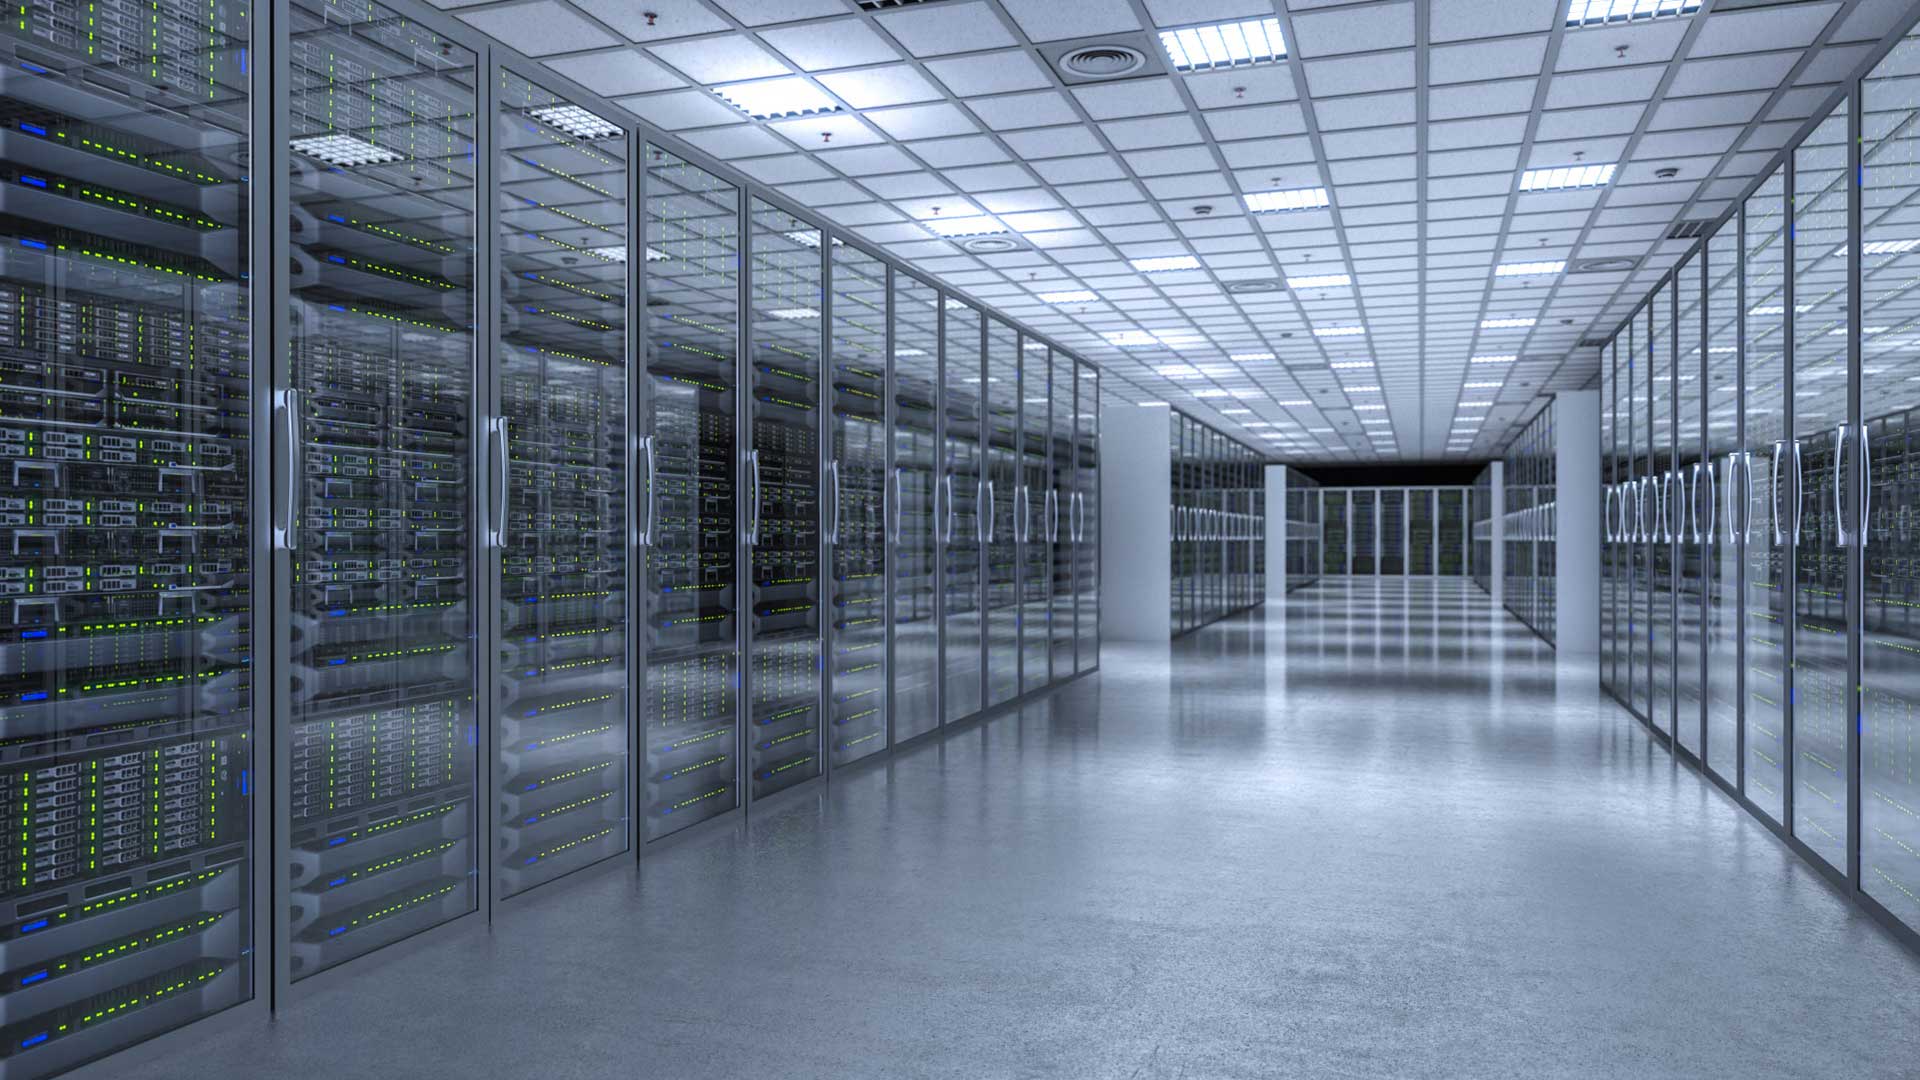 Is zero-carbon data centers possible?